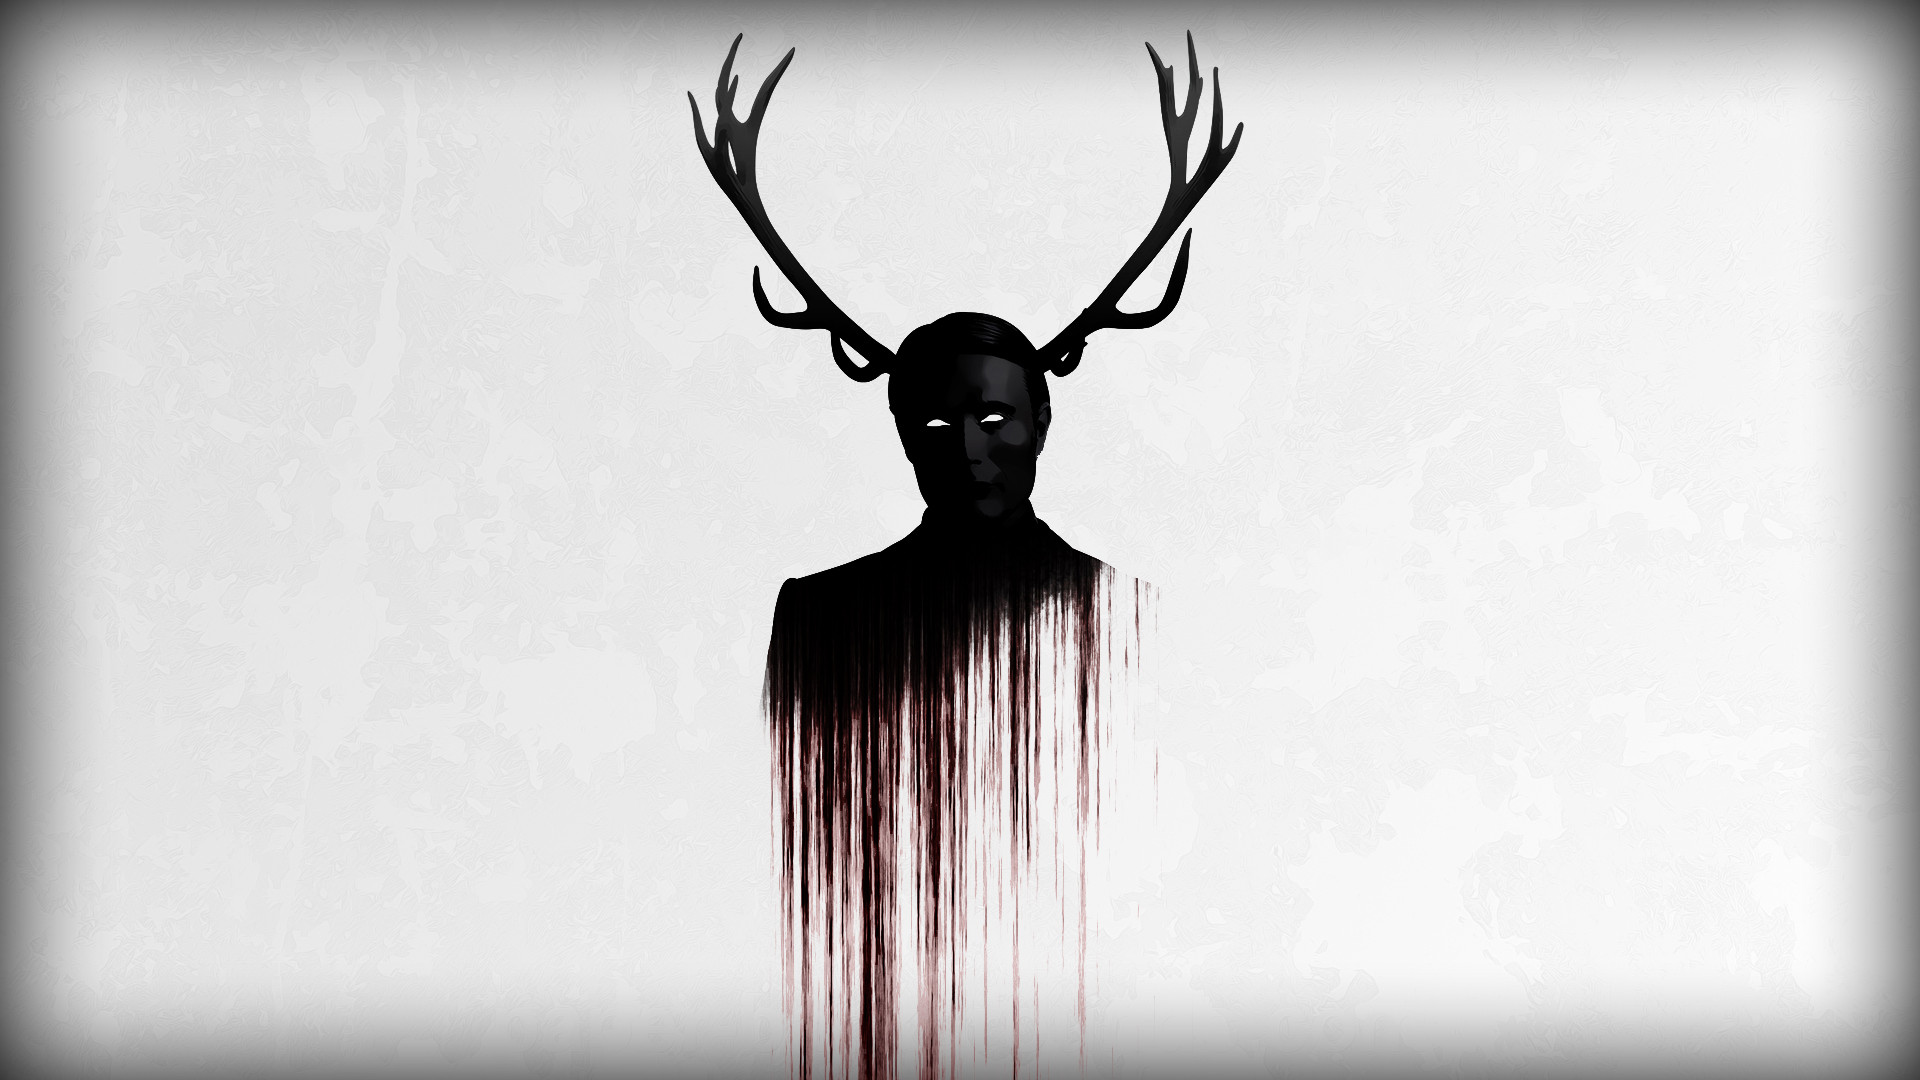 Hannibal Wallpaper Pictures Image